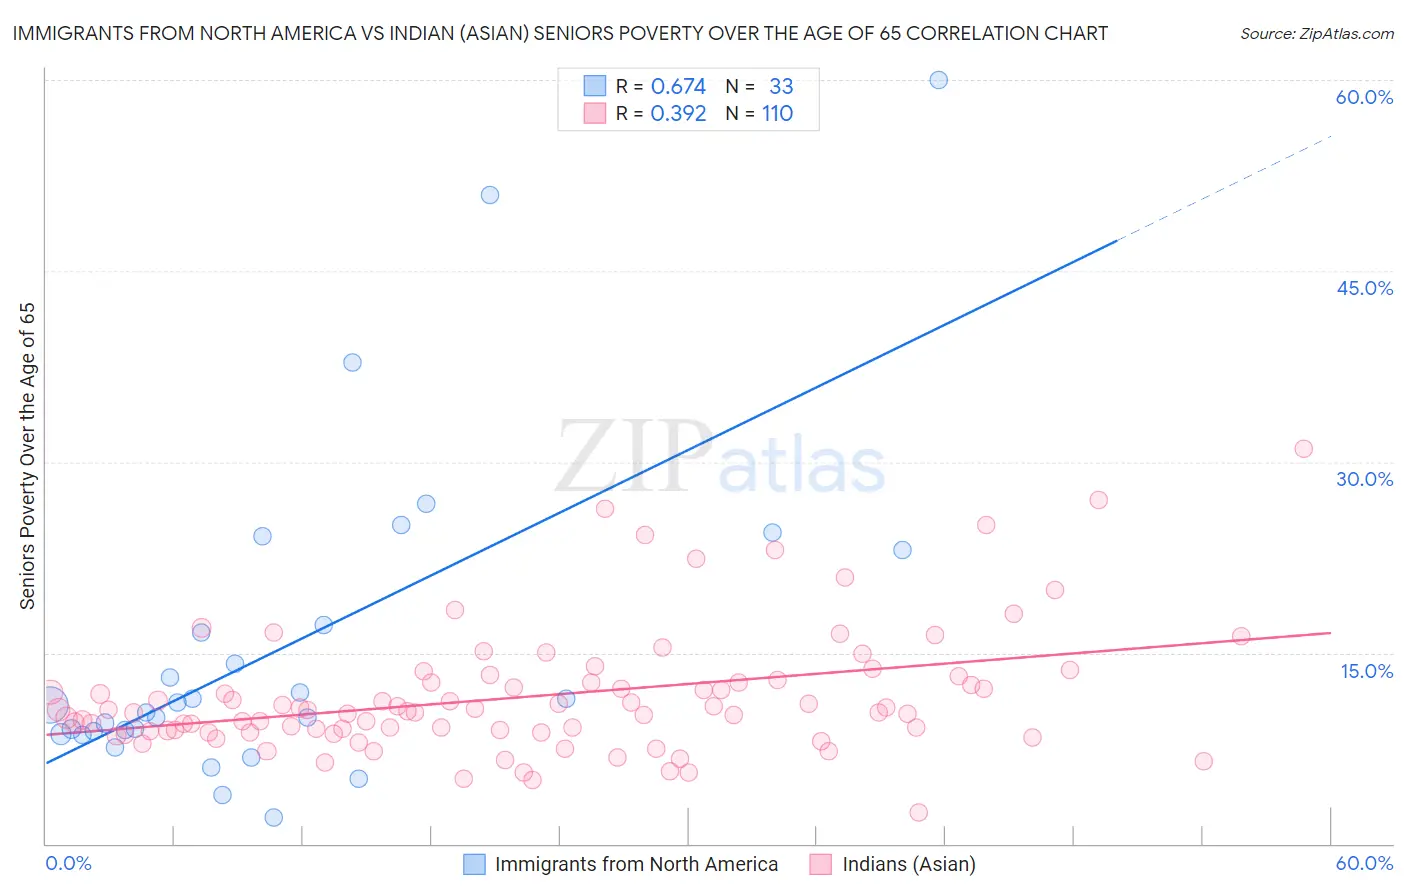 Immigrants from North America vs Indian (Asian) Seniors Poverty Over the Age of 65